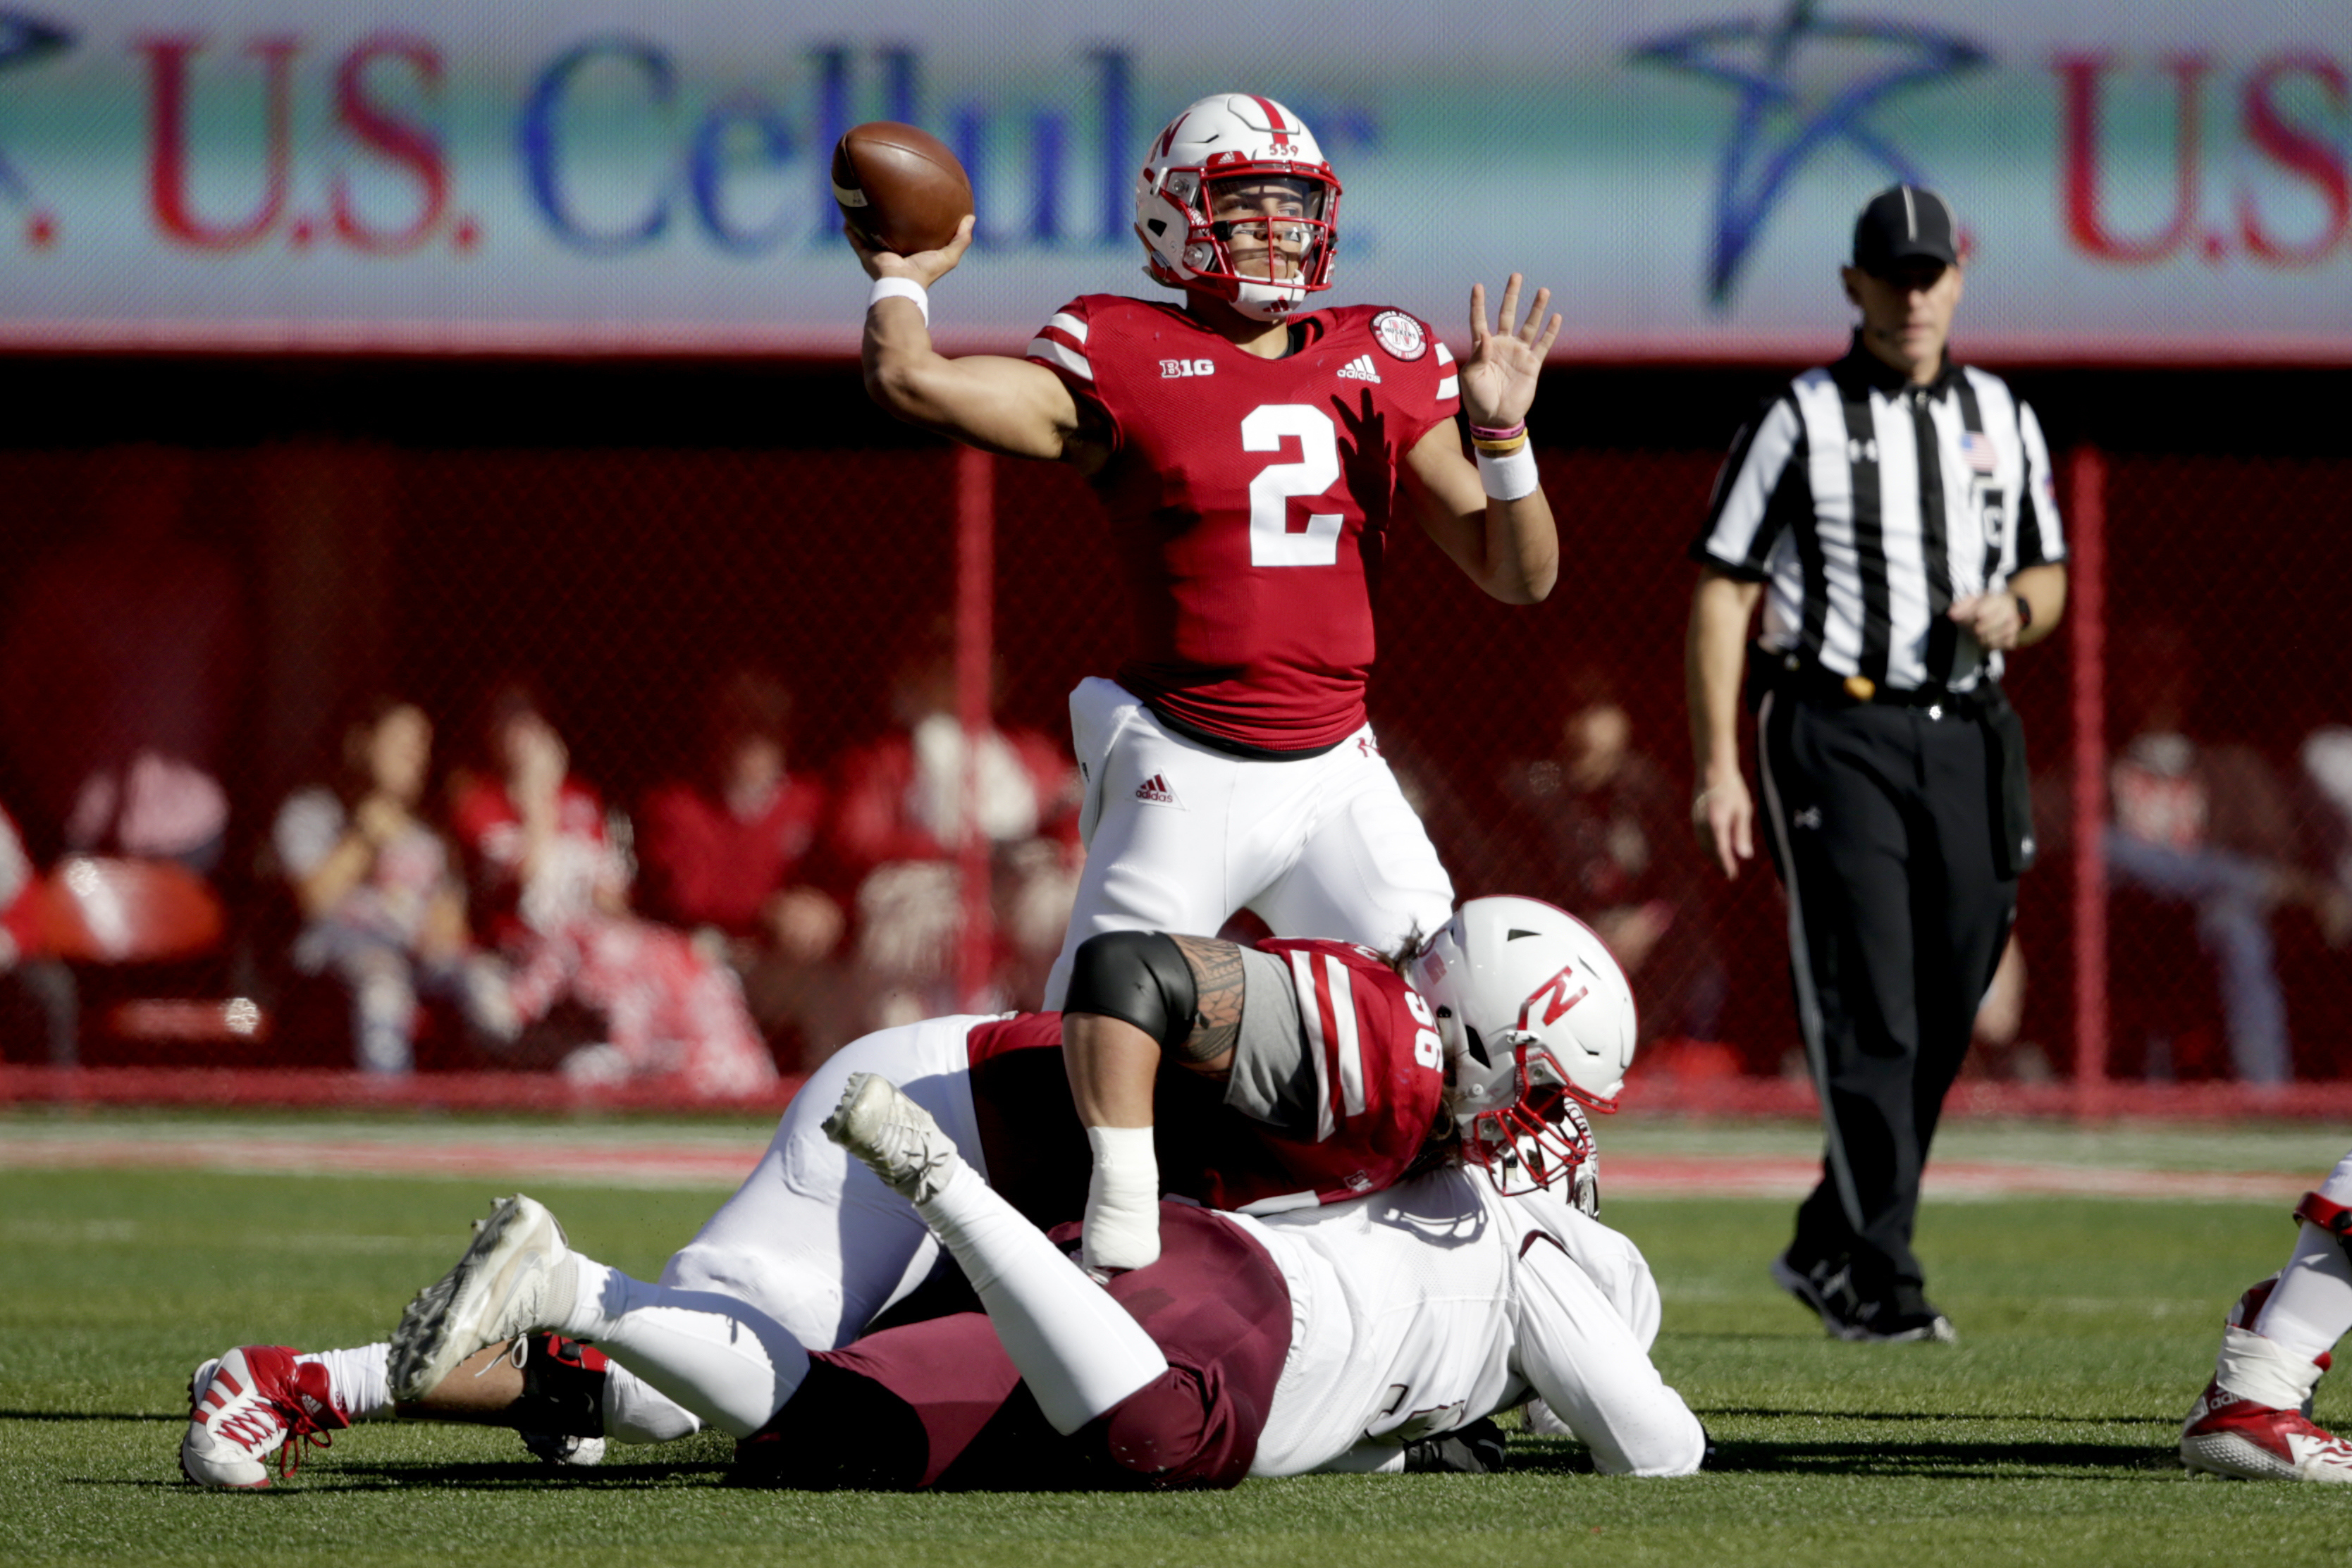 Huskers prep for Ohio St. in 45-9 win over Bethune-Cookman